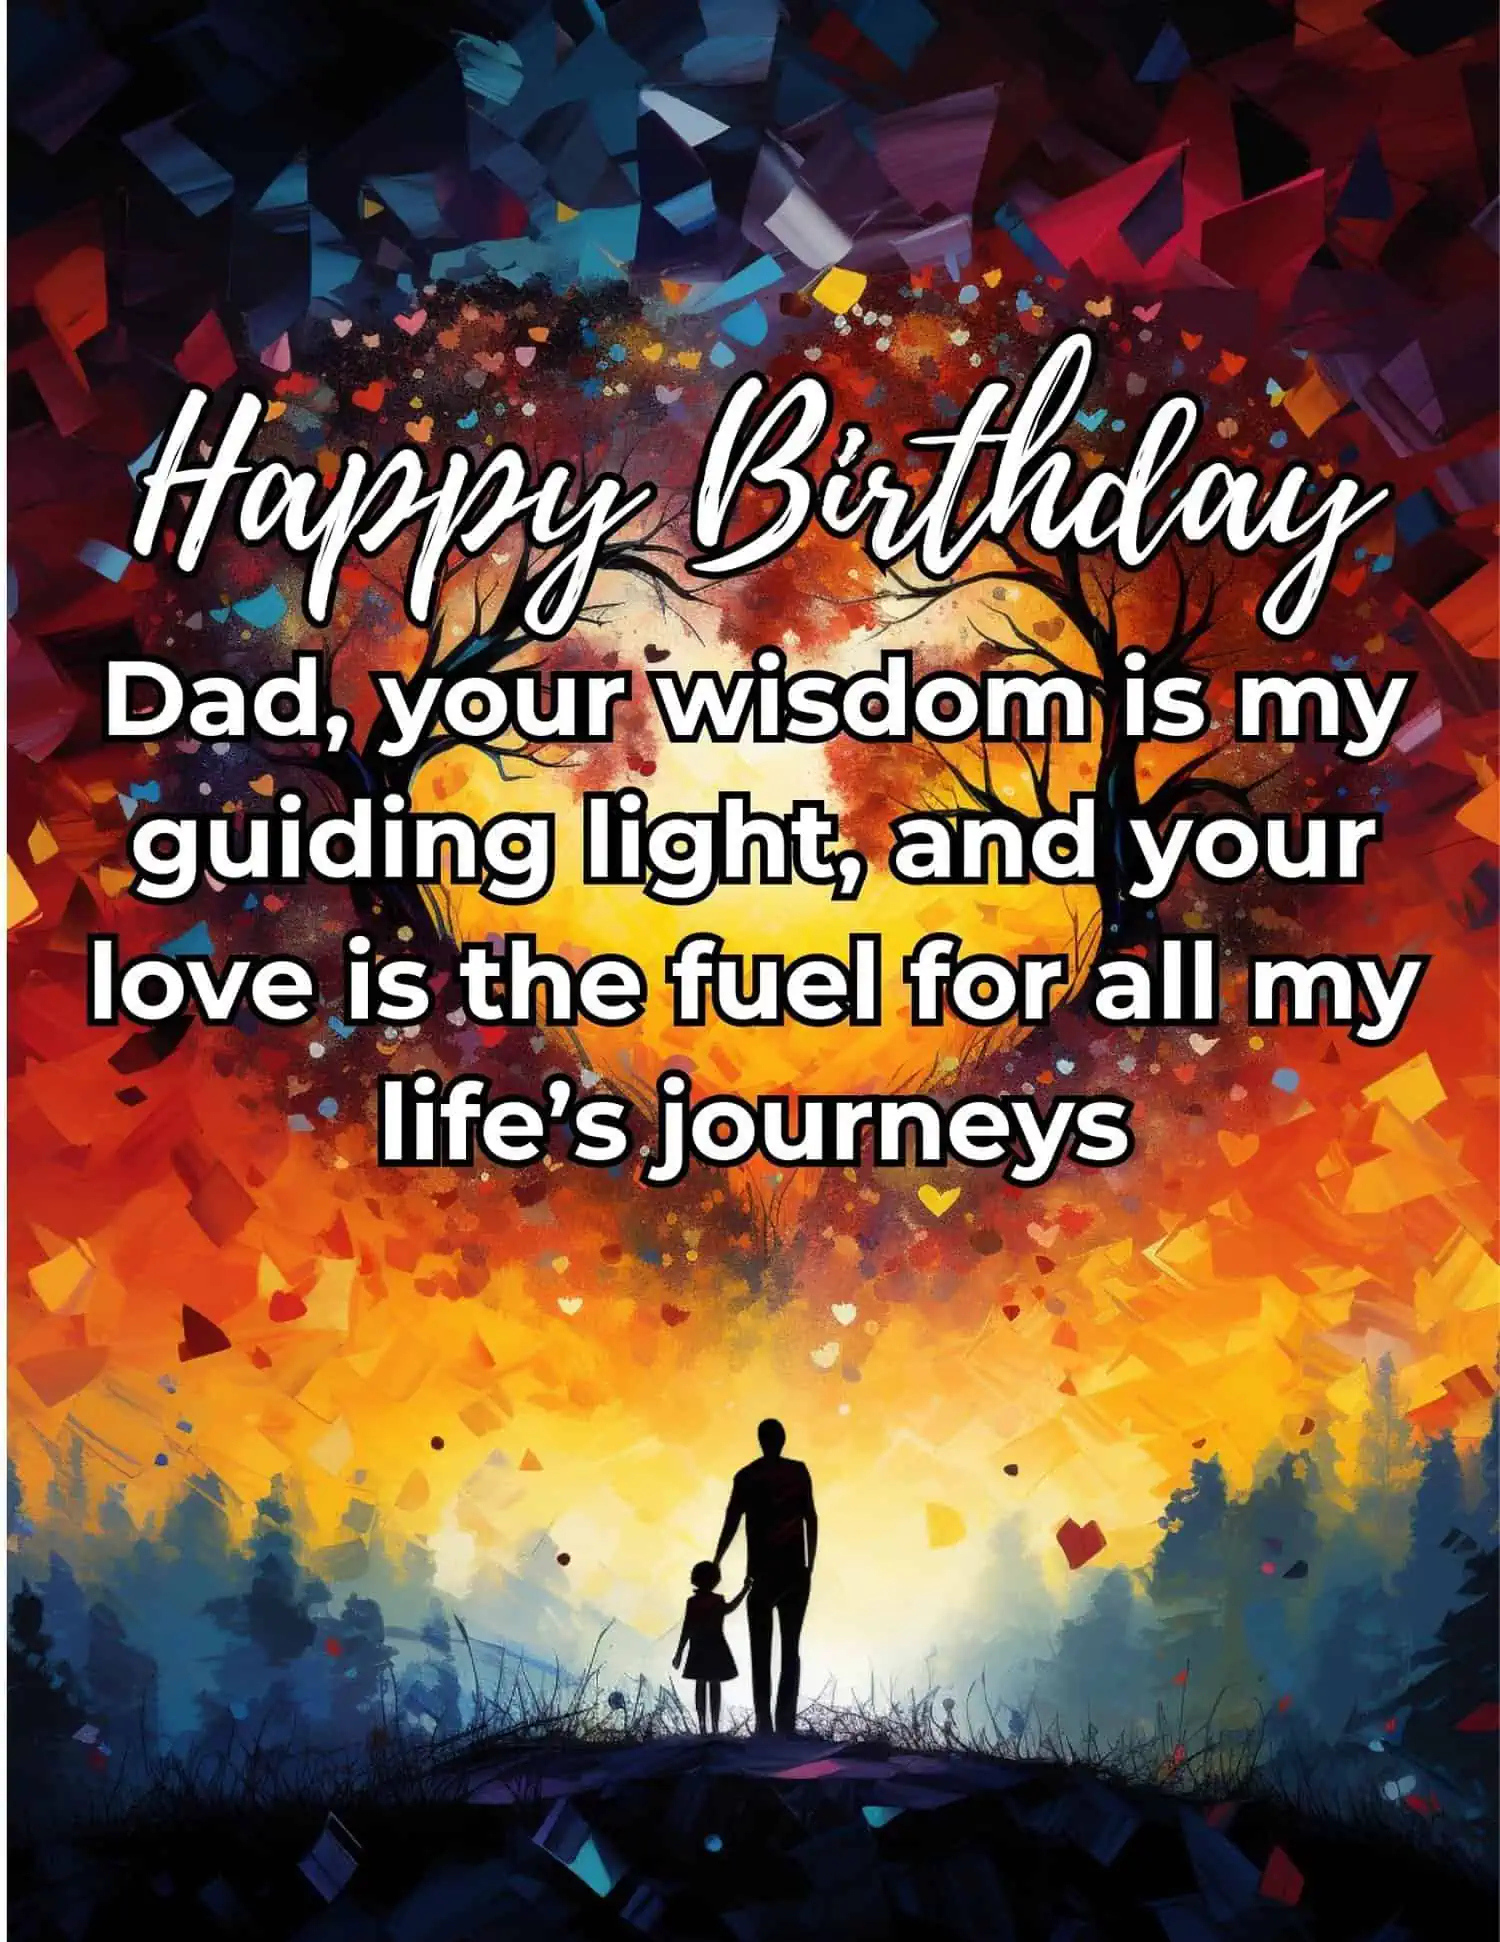 Collection of emotional and meaningful birthday wishes for your father.